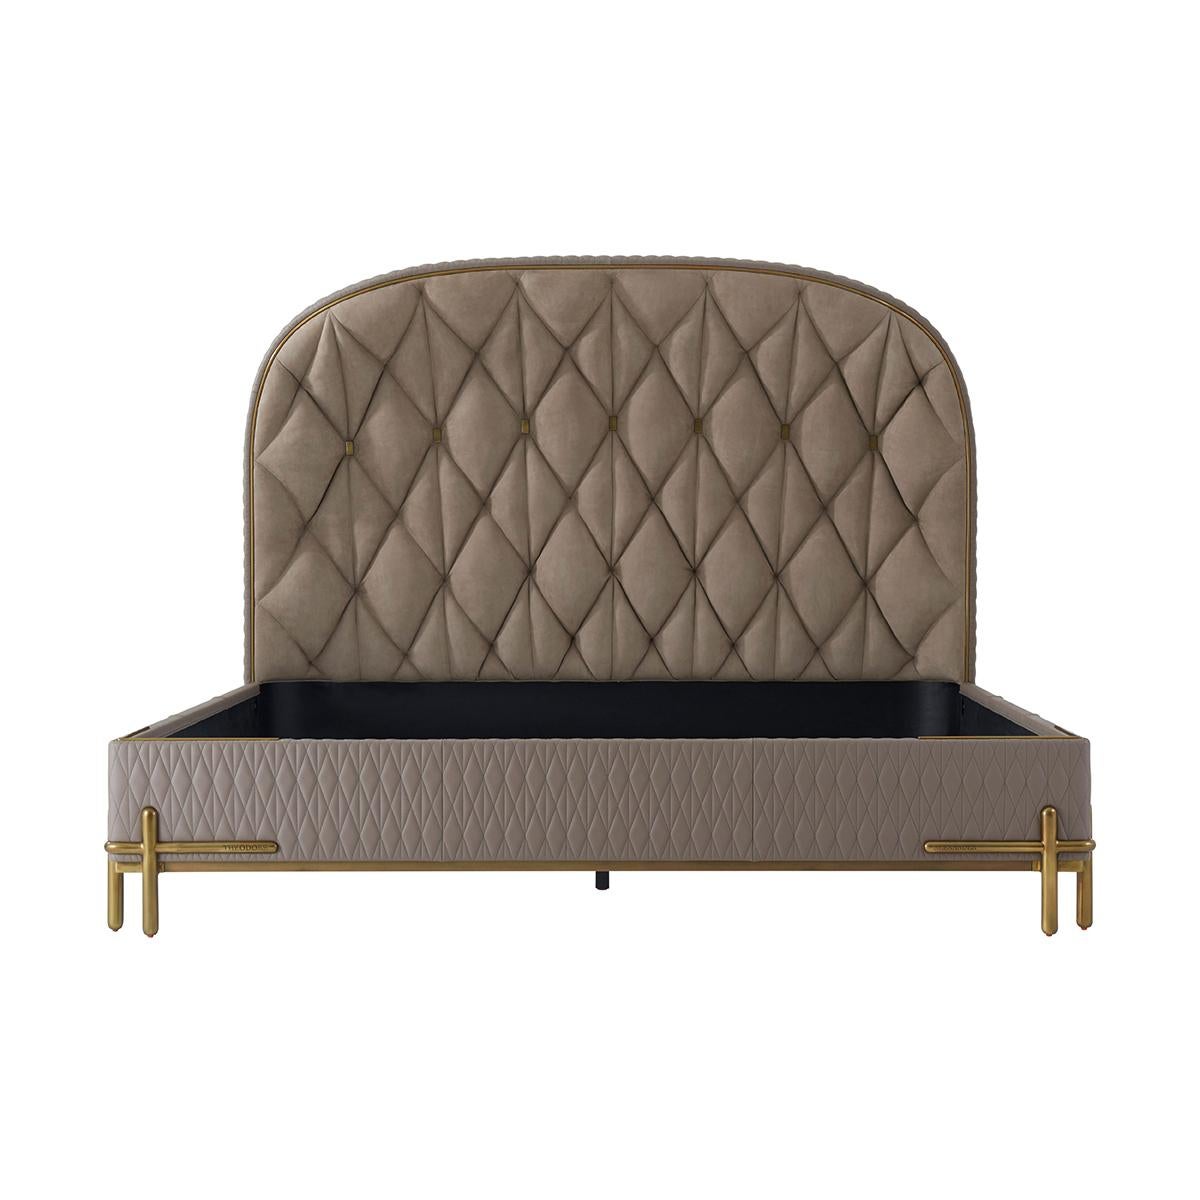 With an arched alcove geometric tufted headboard with brass finish button tufting, with quilted rails and modern batton legs and supports. 

Dimensions: 82.5